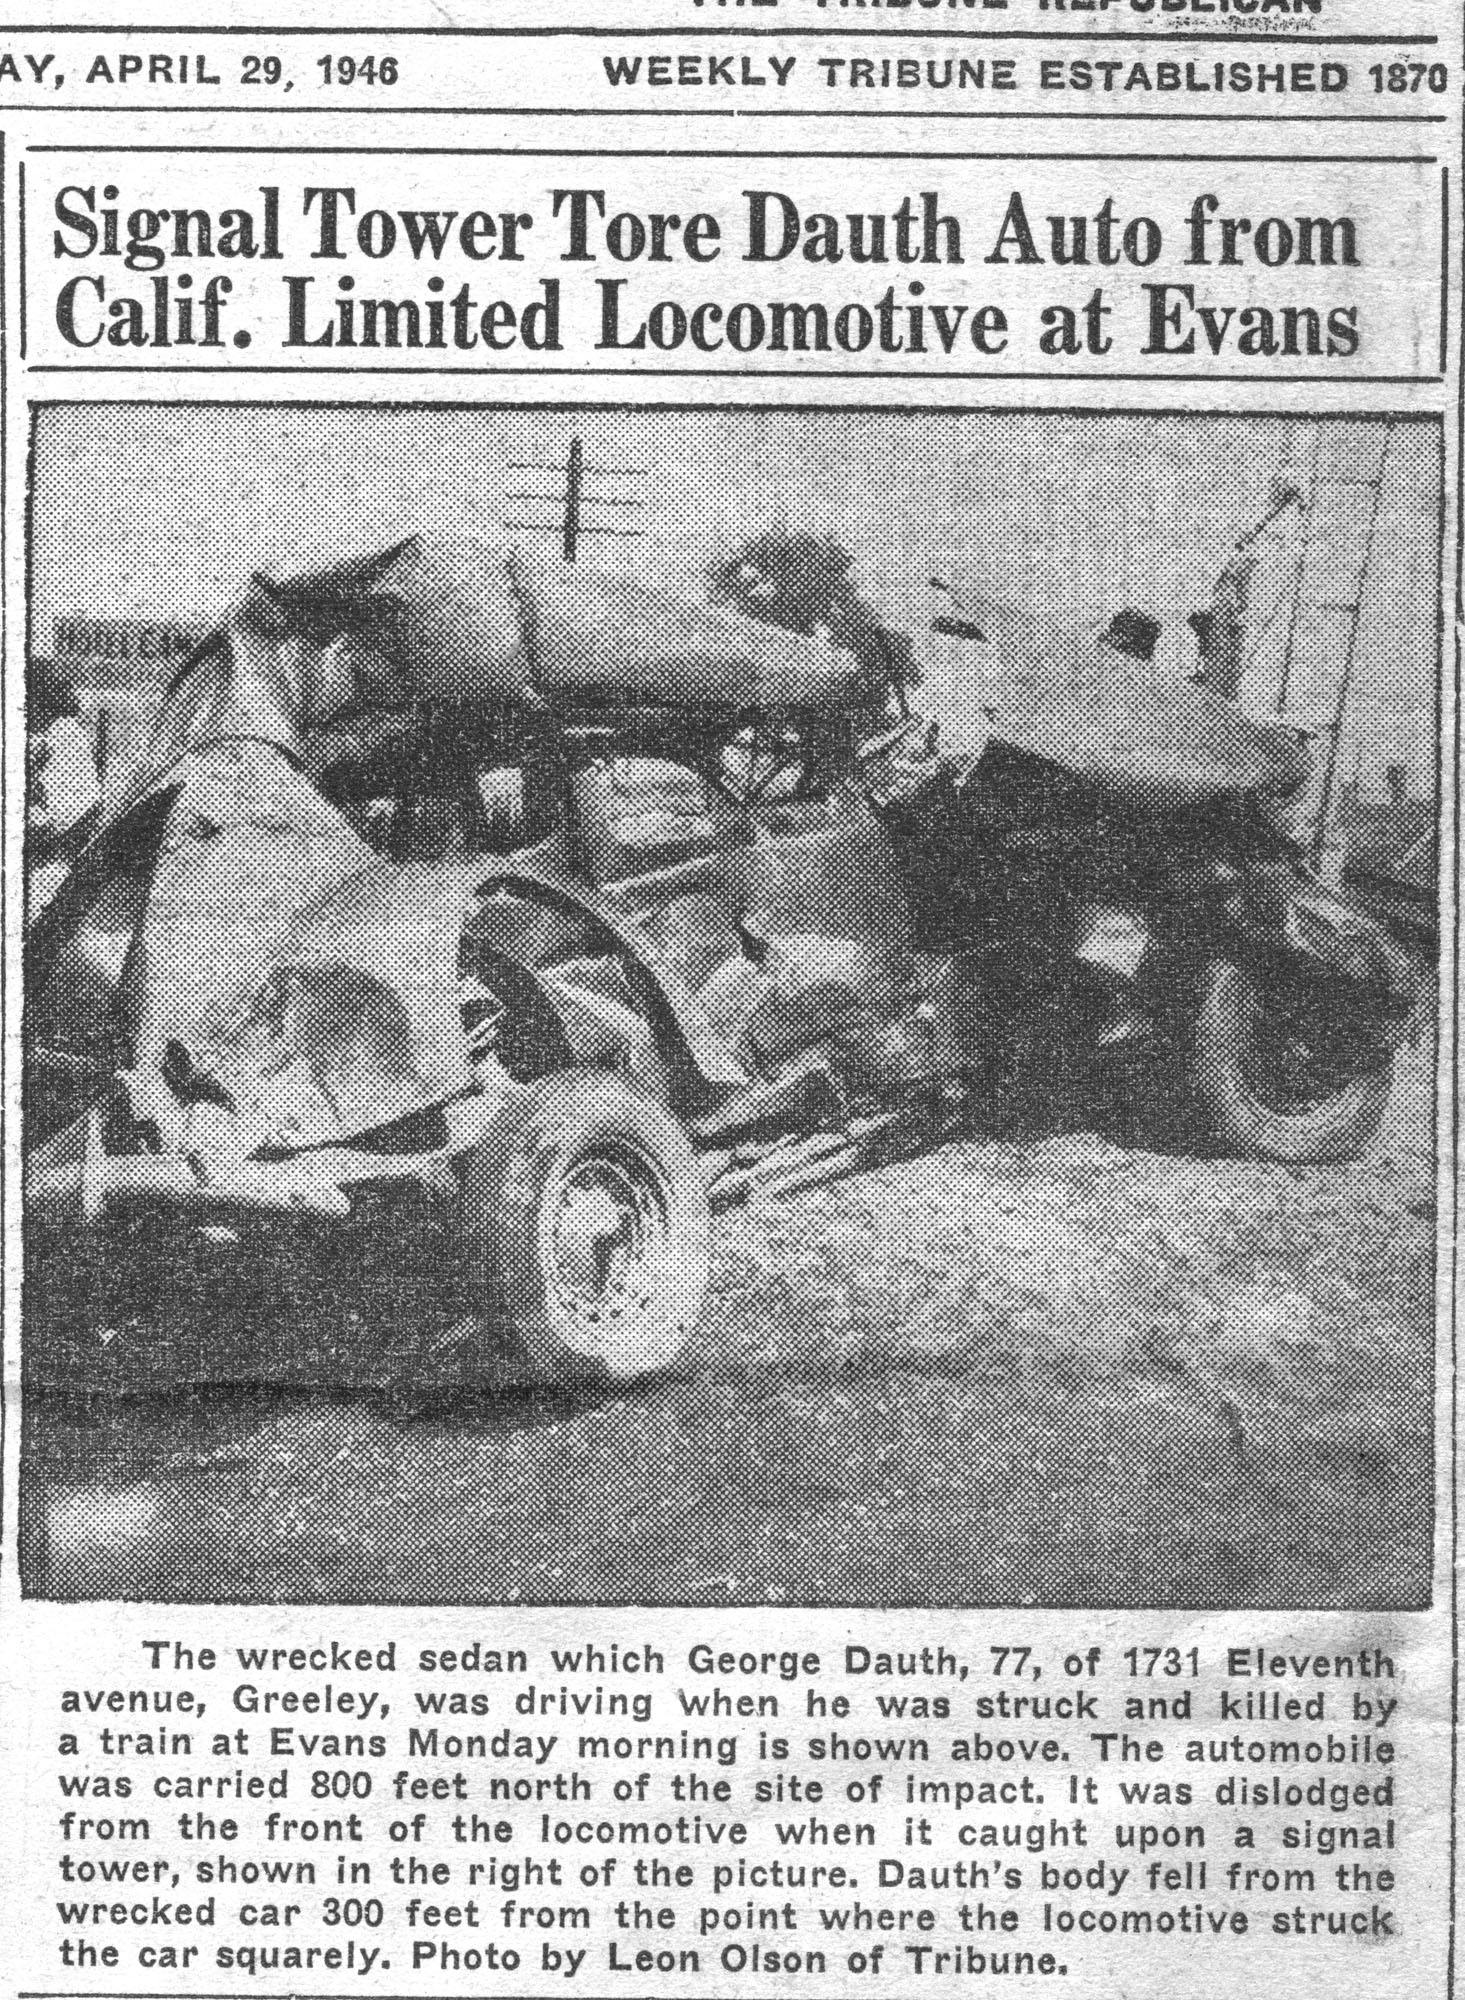 Dauth Family Archive - 1946-04-29 - Weekly Tribune - Photo of George Dauth's Wrecked Vehicle